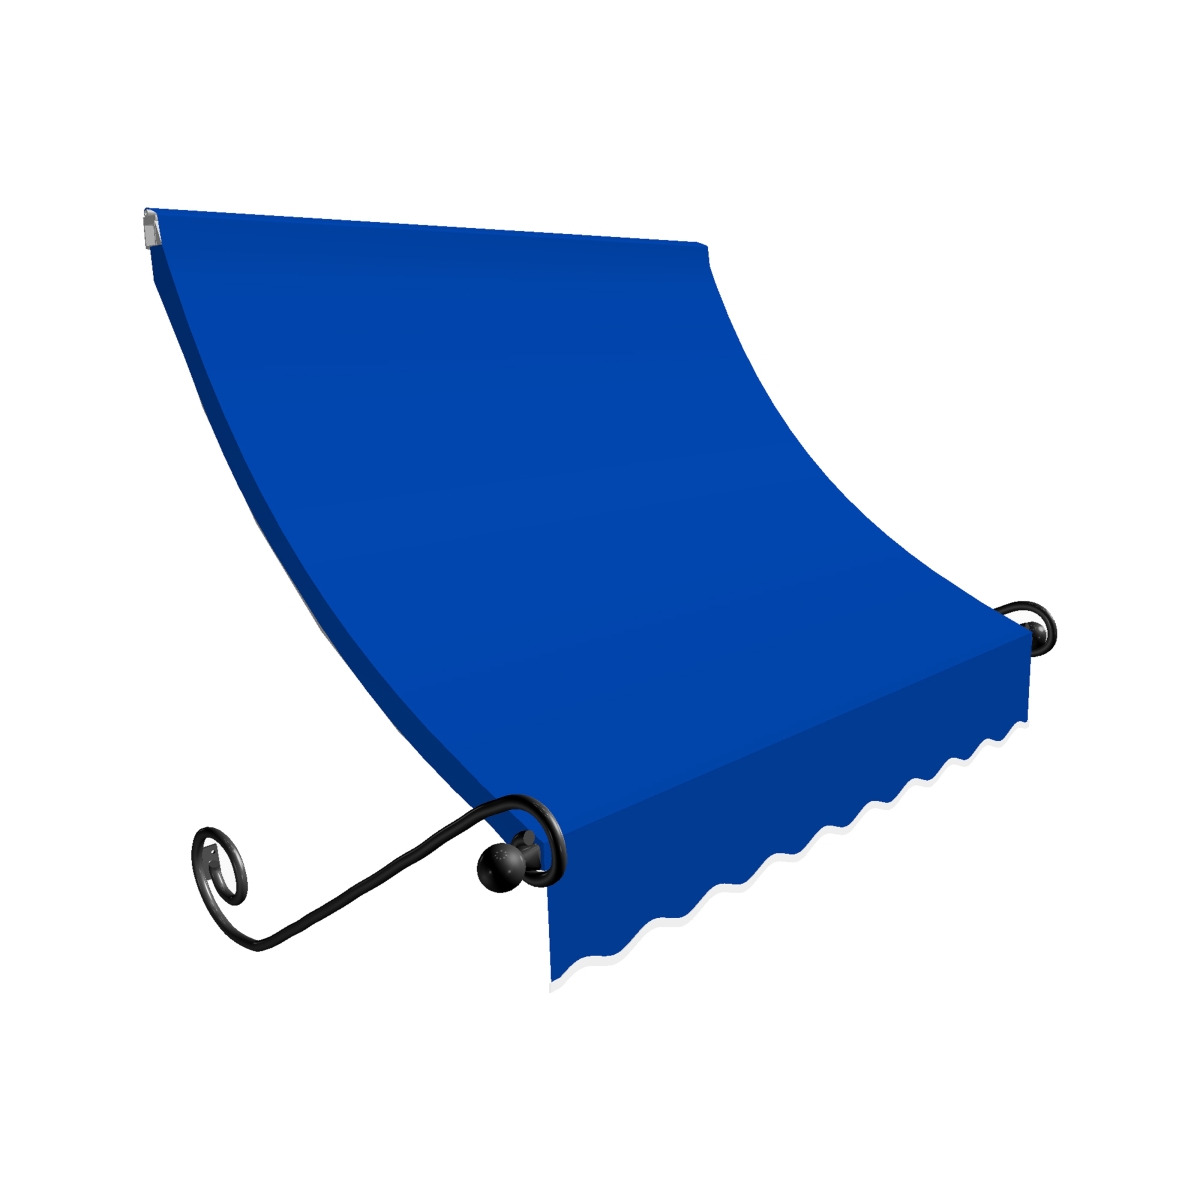 Ch22-us-6bb 6.38 Ft. Charleston Window & Entry Awning, Bright Blue - 31 X 24 In.